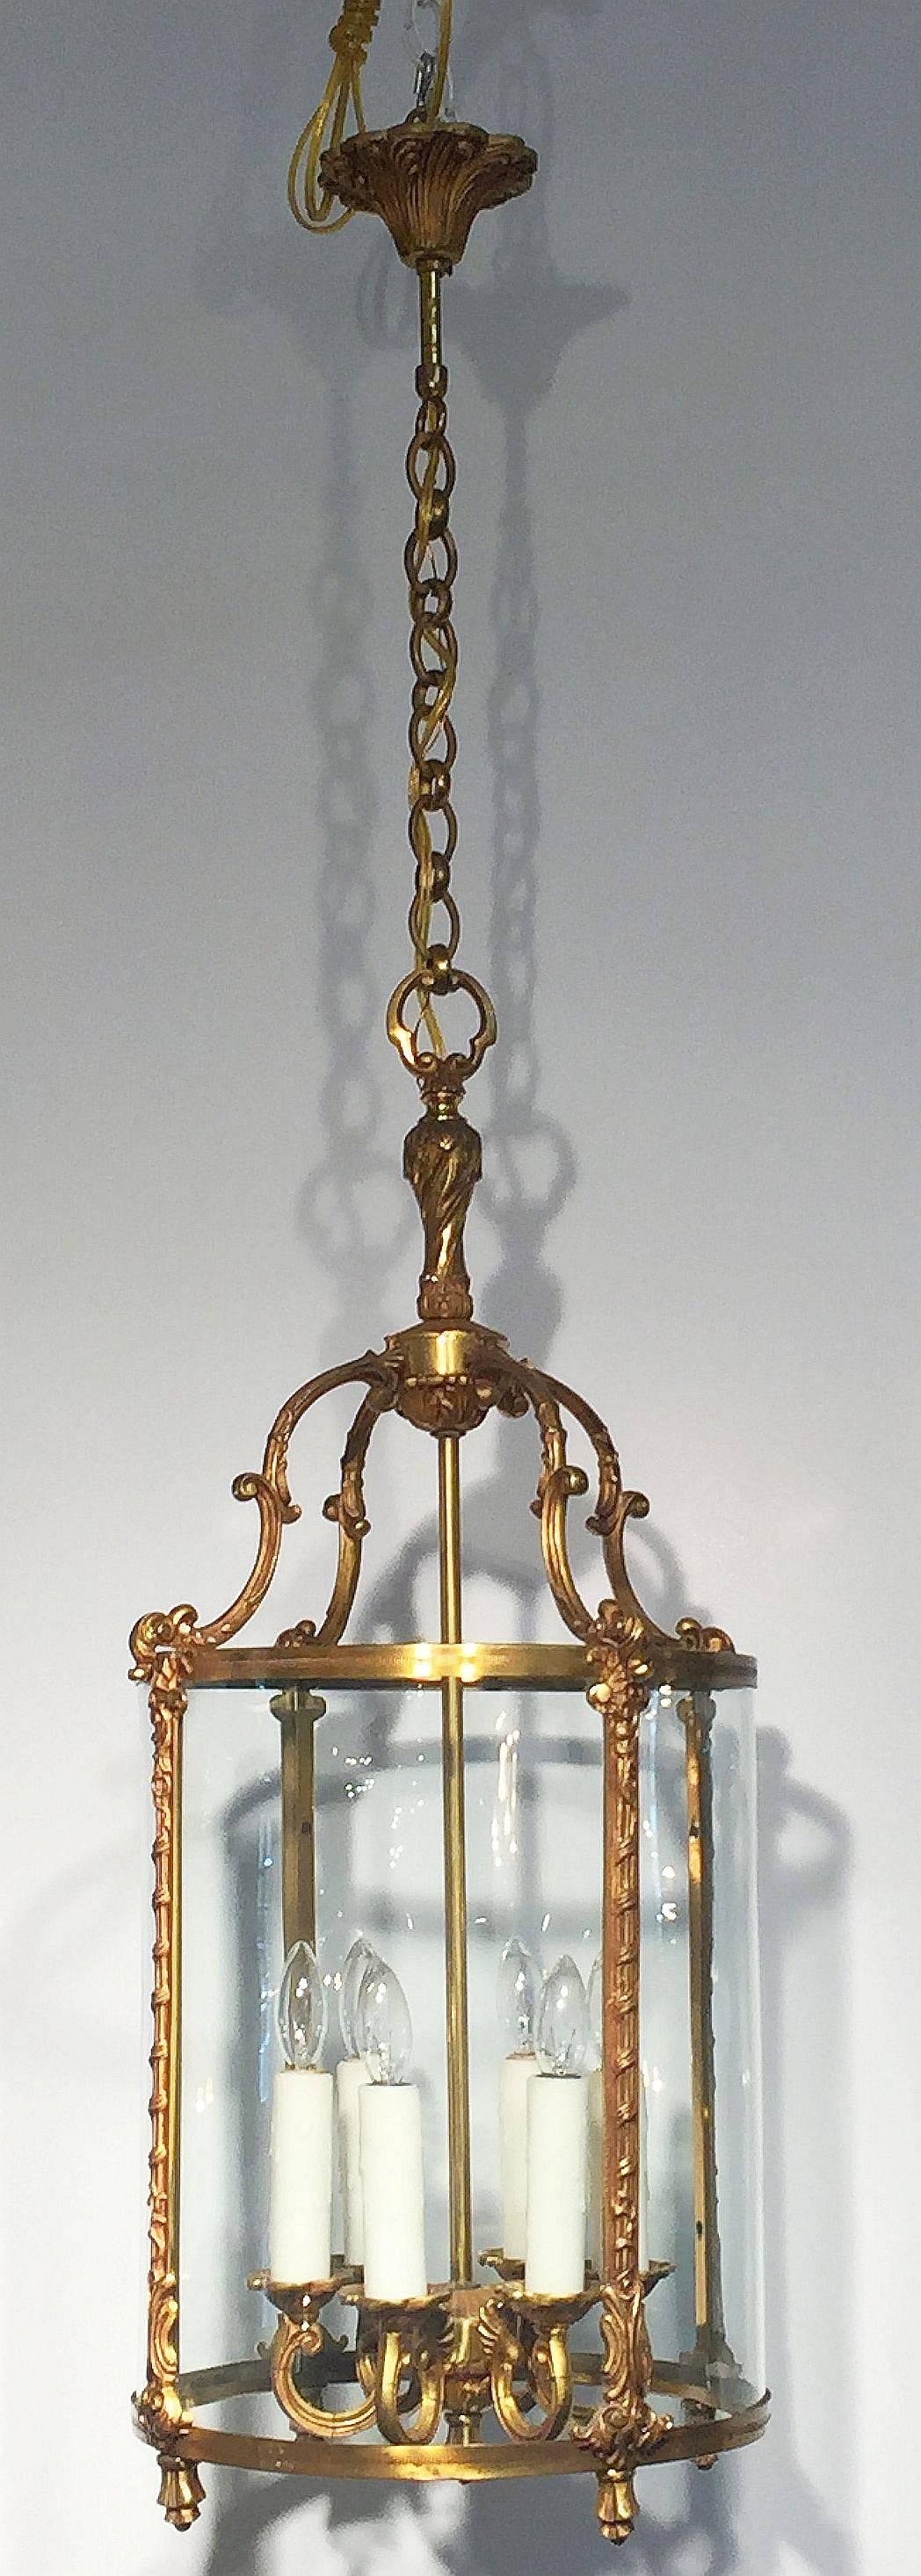 A large French six-light hanging fixture or lantern of gilt metal and glass, featuring a cylindrical body with scroll-work top and six candle lights with gilt metal bobeches and curved glass. Decorative flourishes to top and base. 

Measures:  H